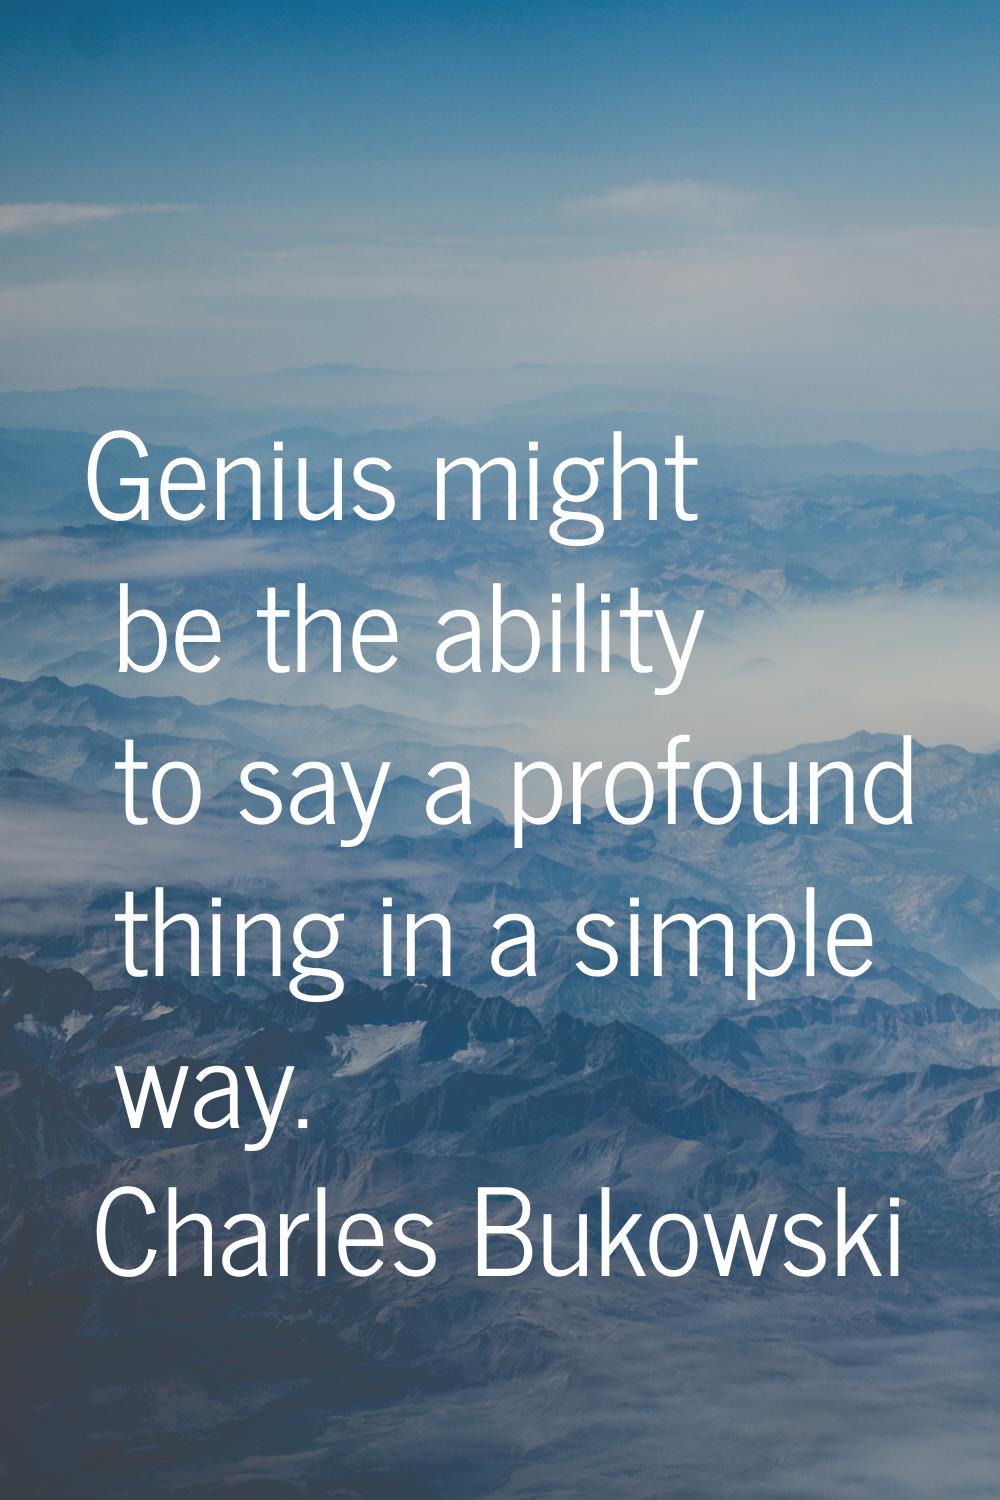 Genius might be the ability to say a profound thing in a simple way.